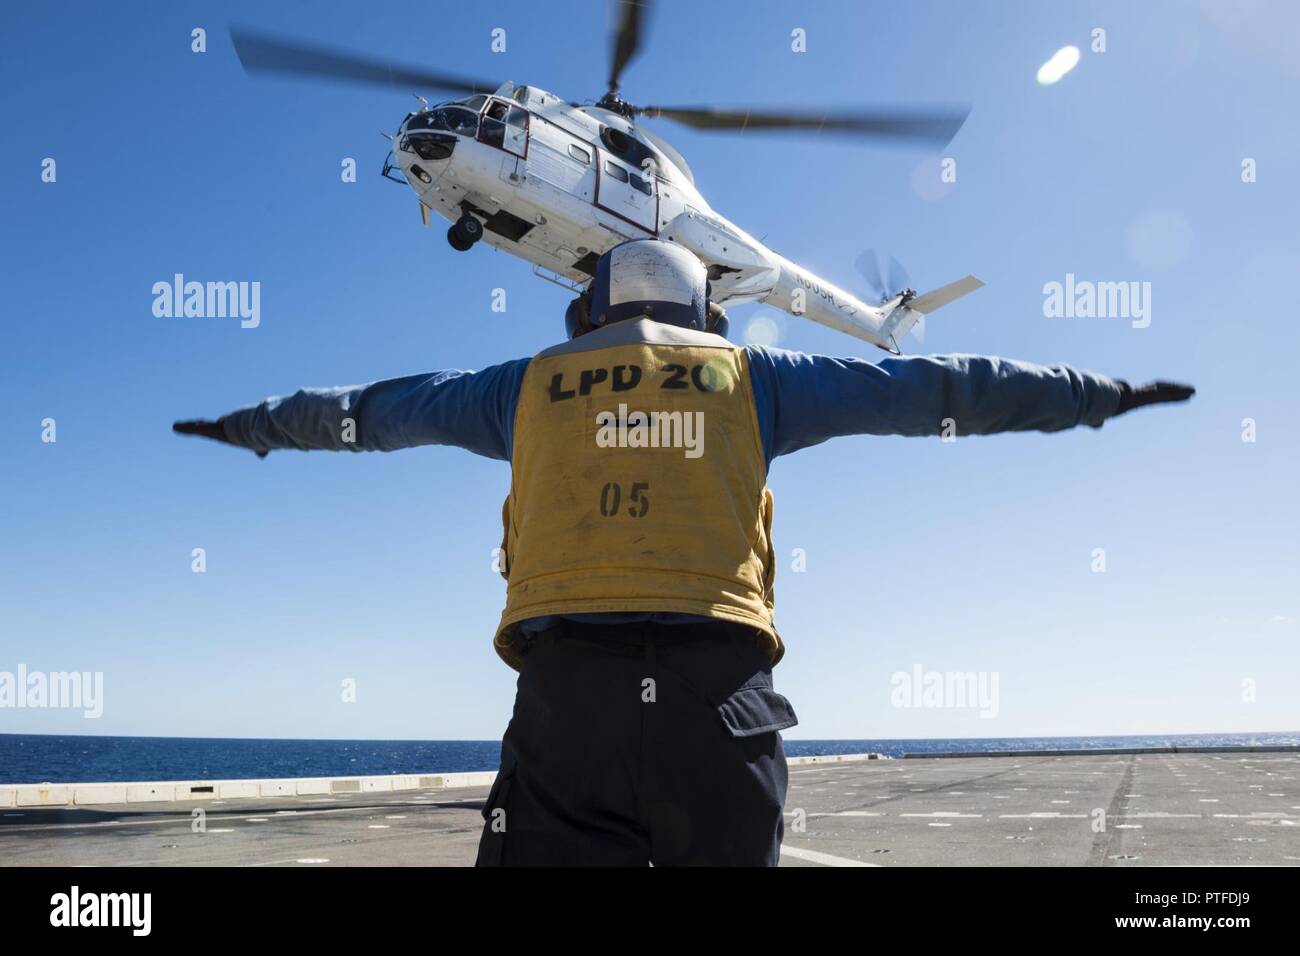 CORAL SEA (July 21, 2017) Aviation Boatswain’s Mate (Handling) Airman Walter Rutherford, from Speedwell, Tenn., directs a SA-330J Puma helicopter, assigned to the Military Sealift Command dry cargo and ammunition ship USNS Richard E. Byrd (T-AKE 4), to drop cargo on the flight deck of the amphibious transport dock USS Green Bay (LPD 20) during a vertical replenishment as a part of Talisman Saber 17. Talisman Saber is a biennial U.S.-Australia bilateral exercise held off the coast of Australia meant to achieve interoperability and strengthen the U.S.-Australia alliance. Stock Photo